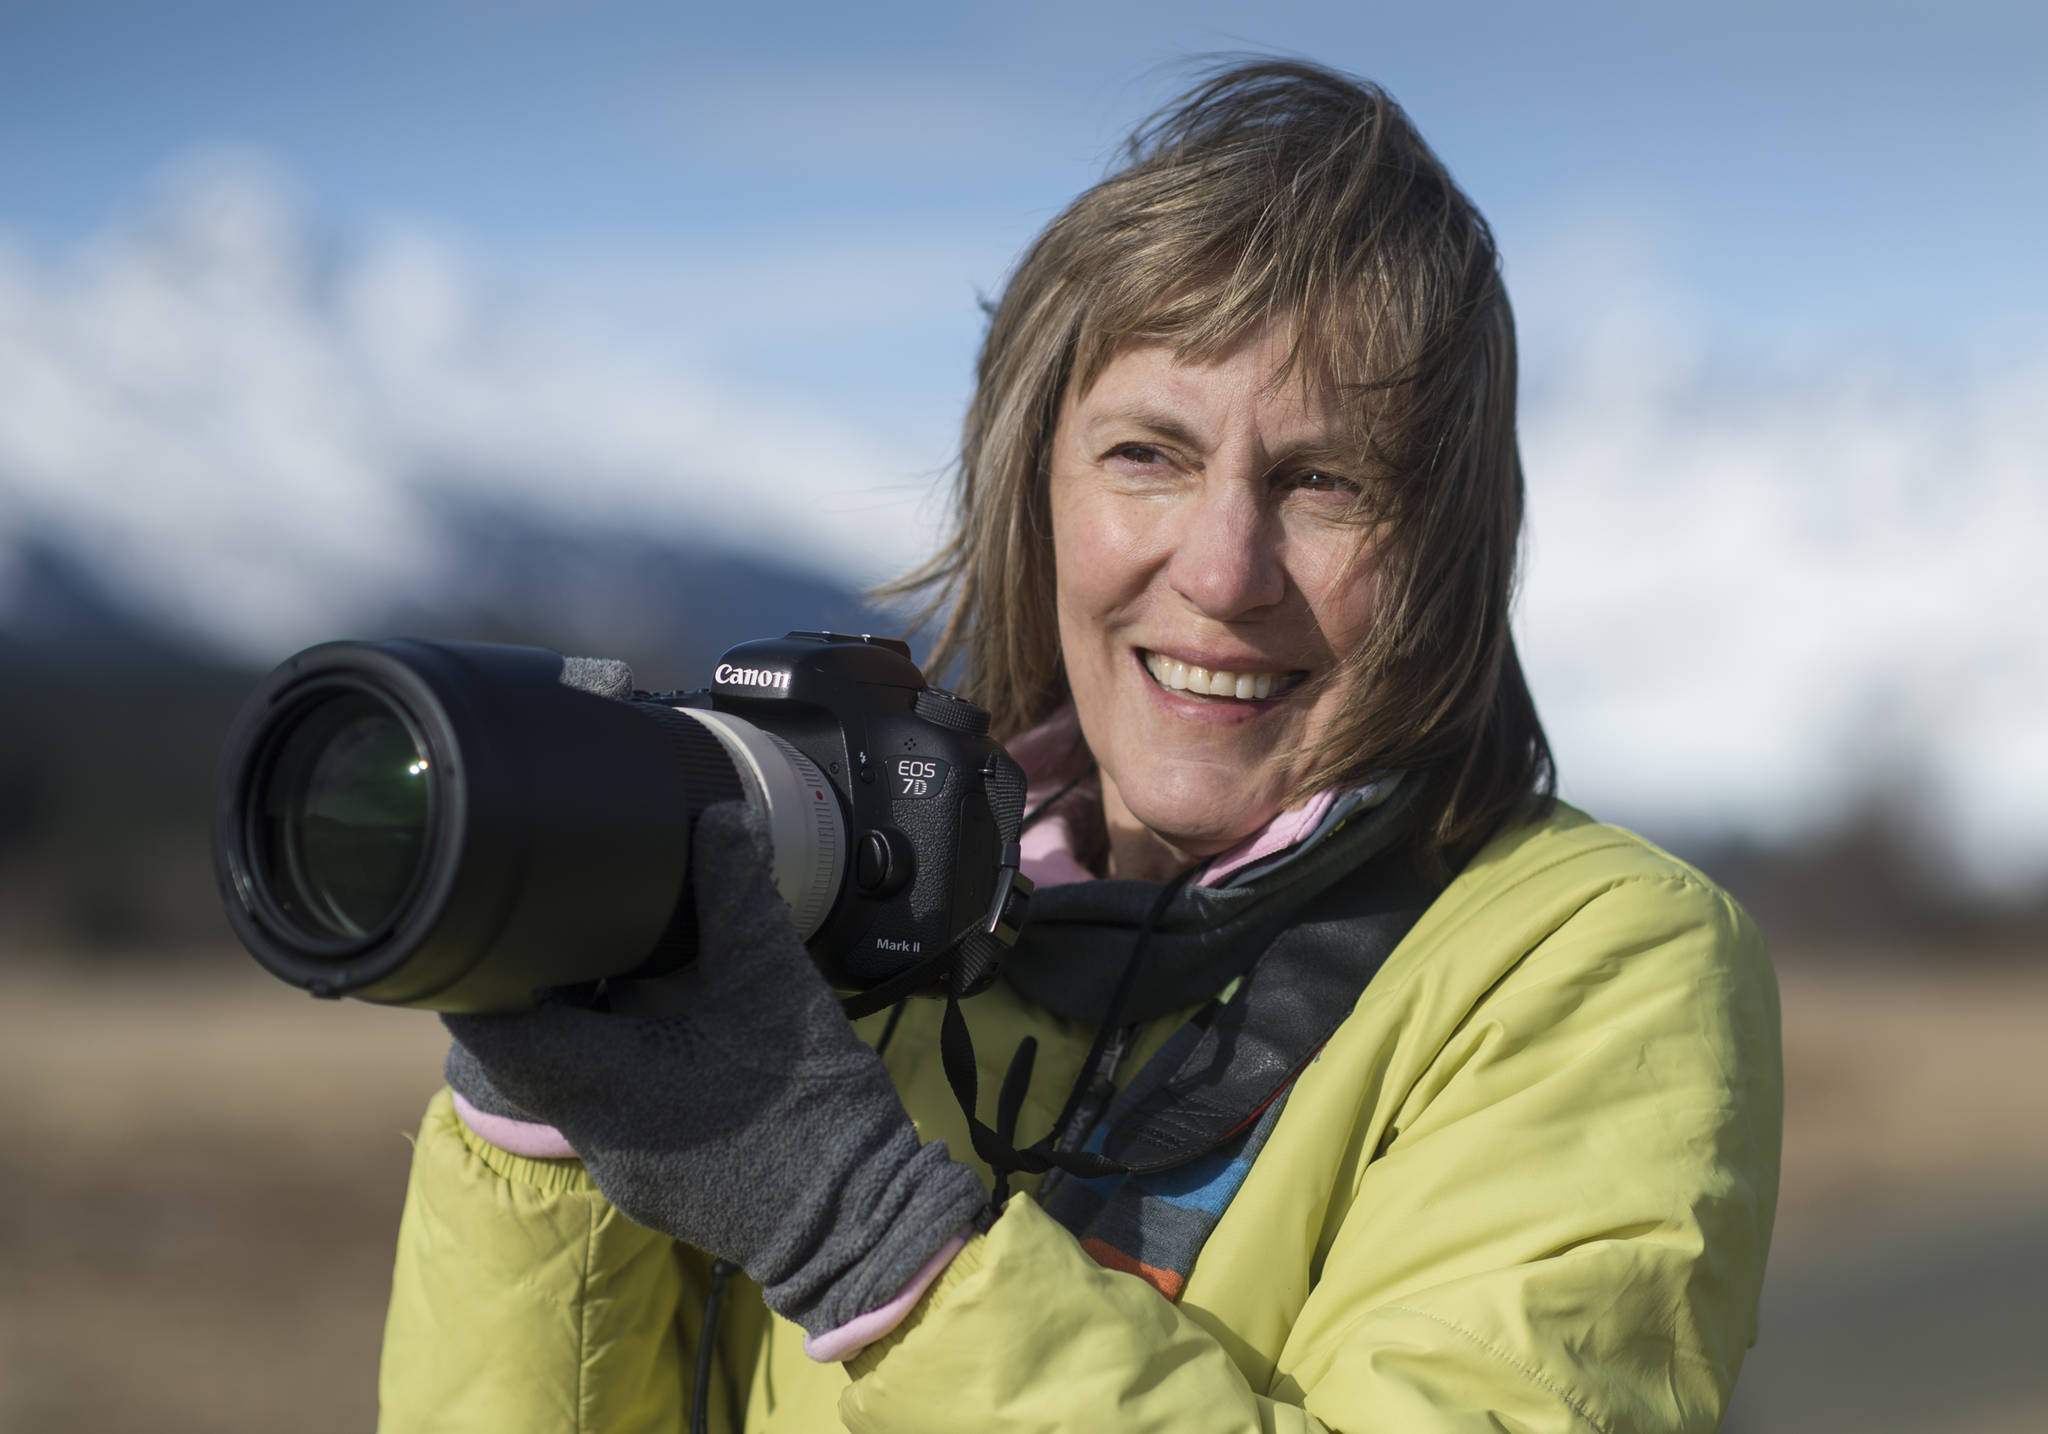 Kerry Howard takes a walk in the Mendenhall Wetlands State Game Refuge on Tuesday, April 3, 2018, to photograph. Howard learned she had Parkinson’s disease two years ago after she noticed a tremble in the little finger on her right hand. (Michael Penn | Juneau Empire)